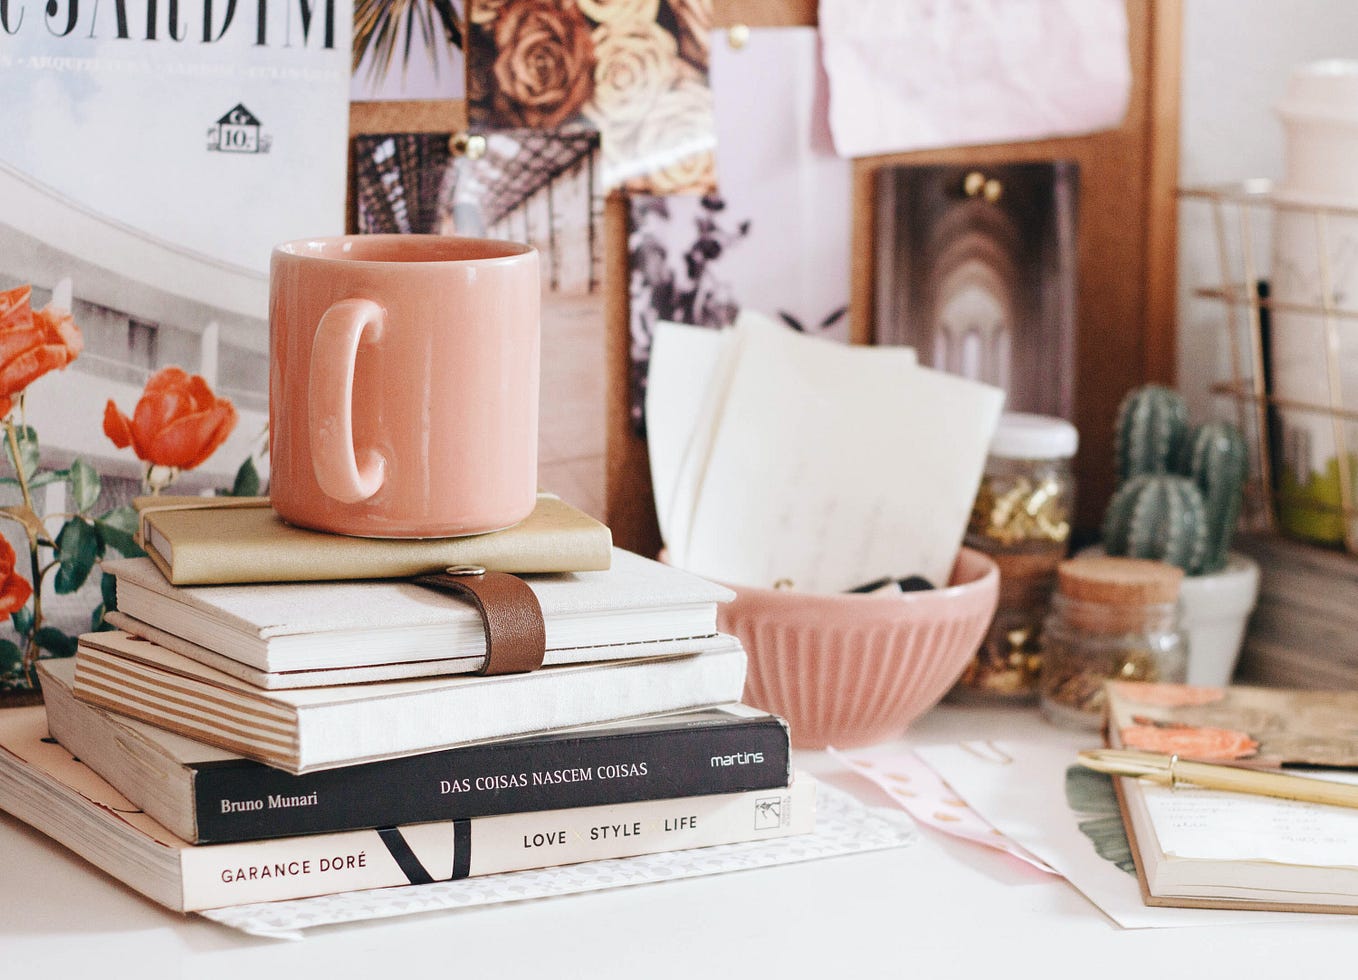 A stack of books and journals sits on a white desk with a pink mug on top of the stack. The desk is covered in a variety of items, including a cactus plant, small pink bowl, and papers. There is a corkboard in the background mostly obscured by photos of flowers and architecture pinned to it.